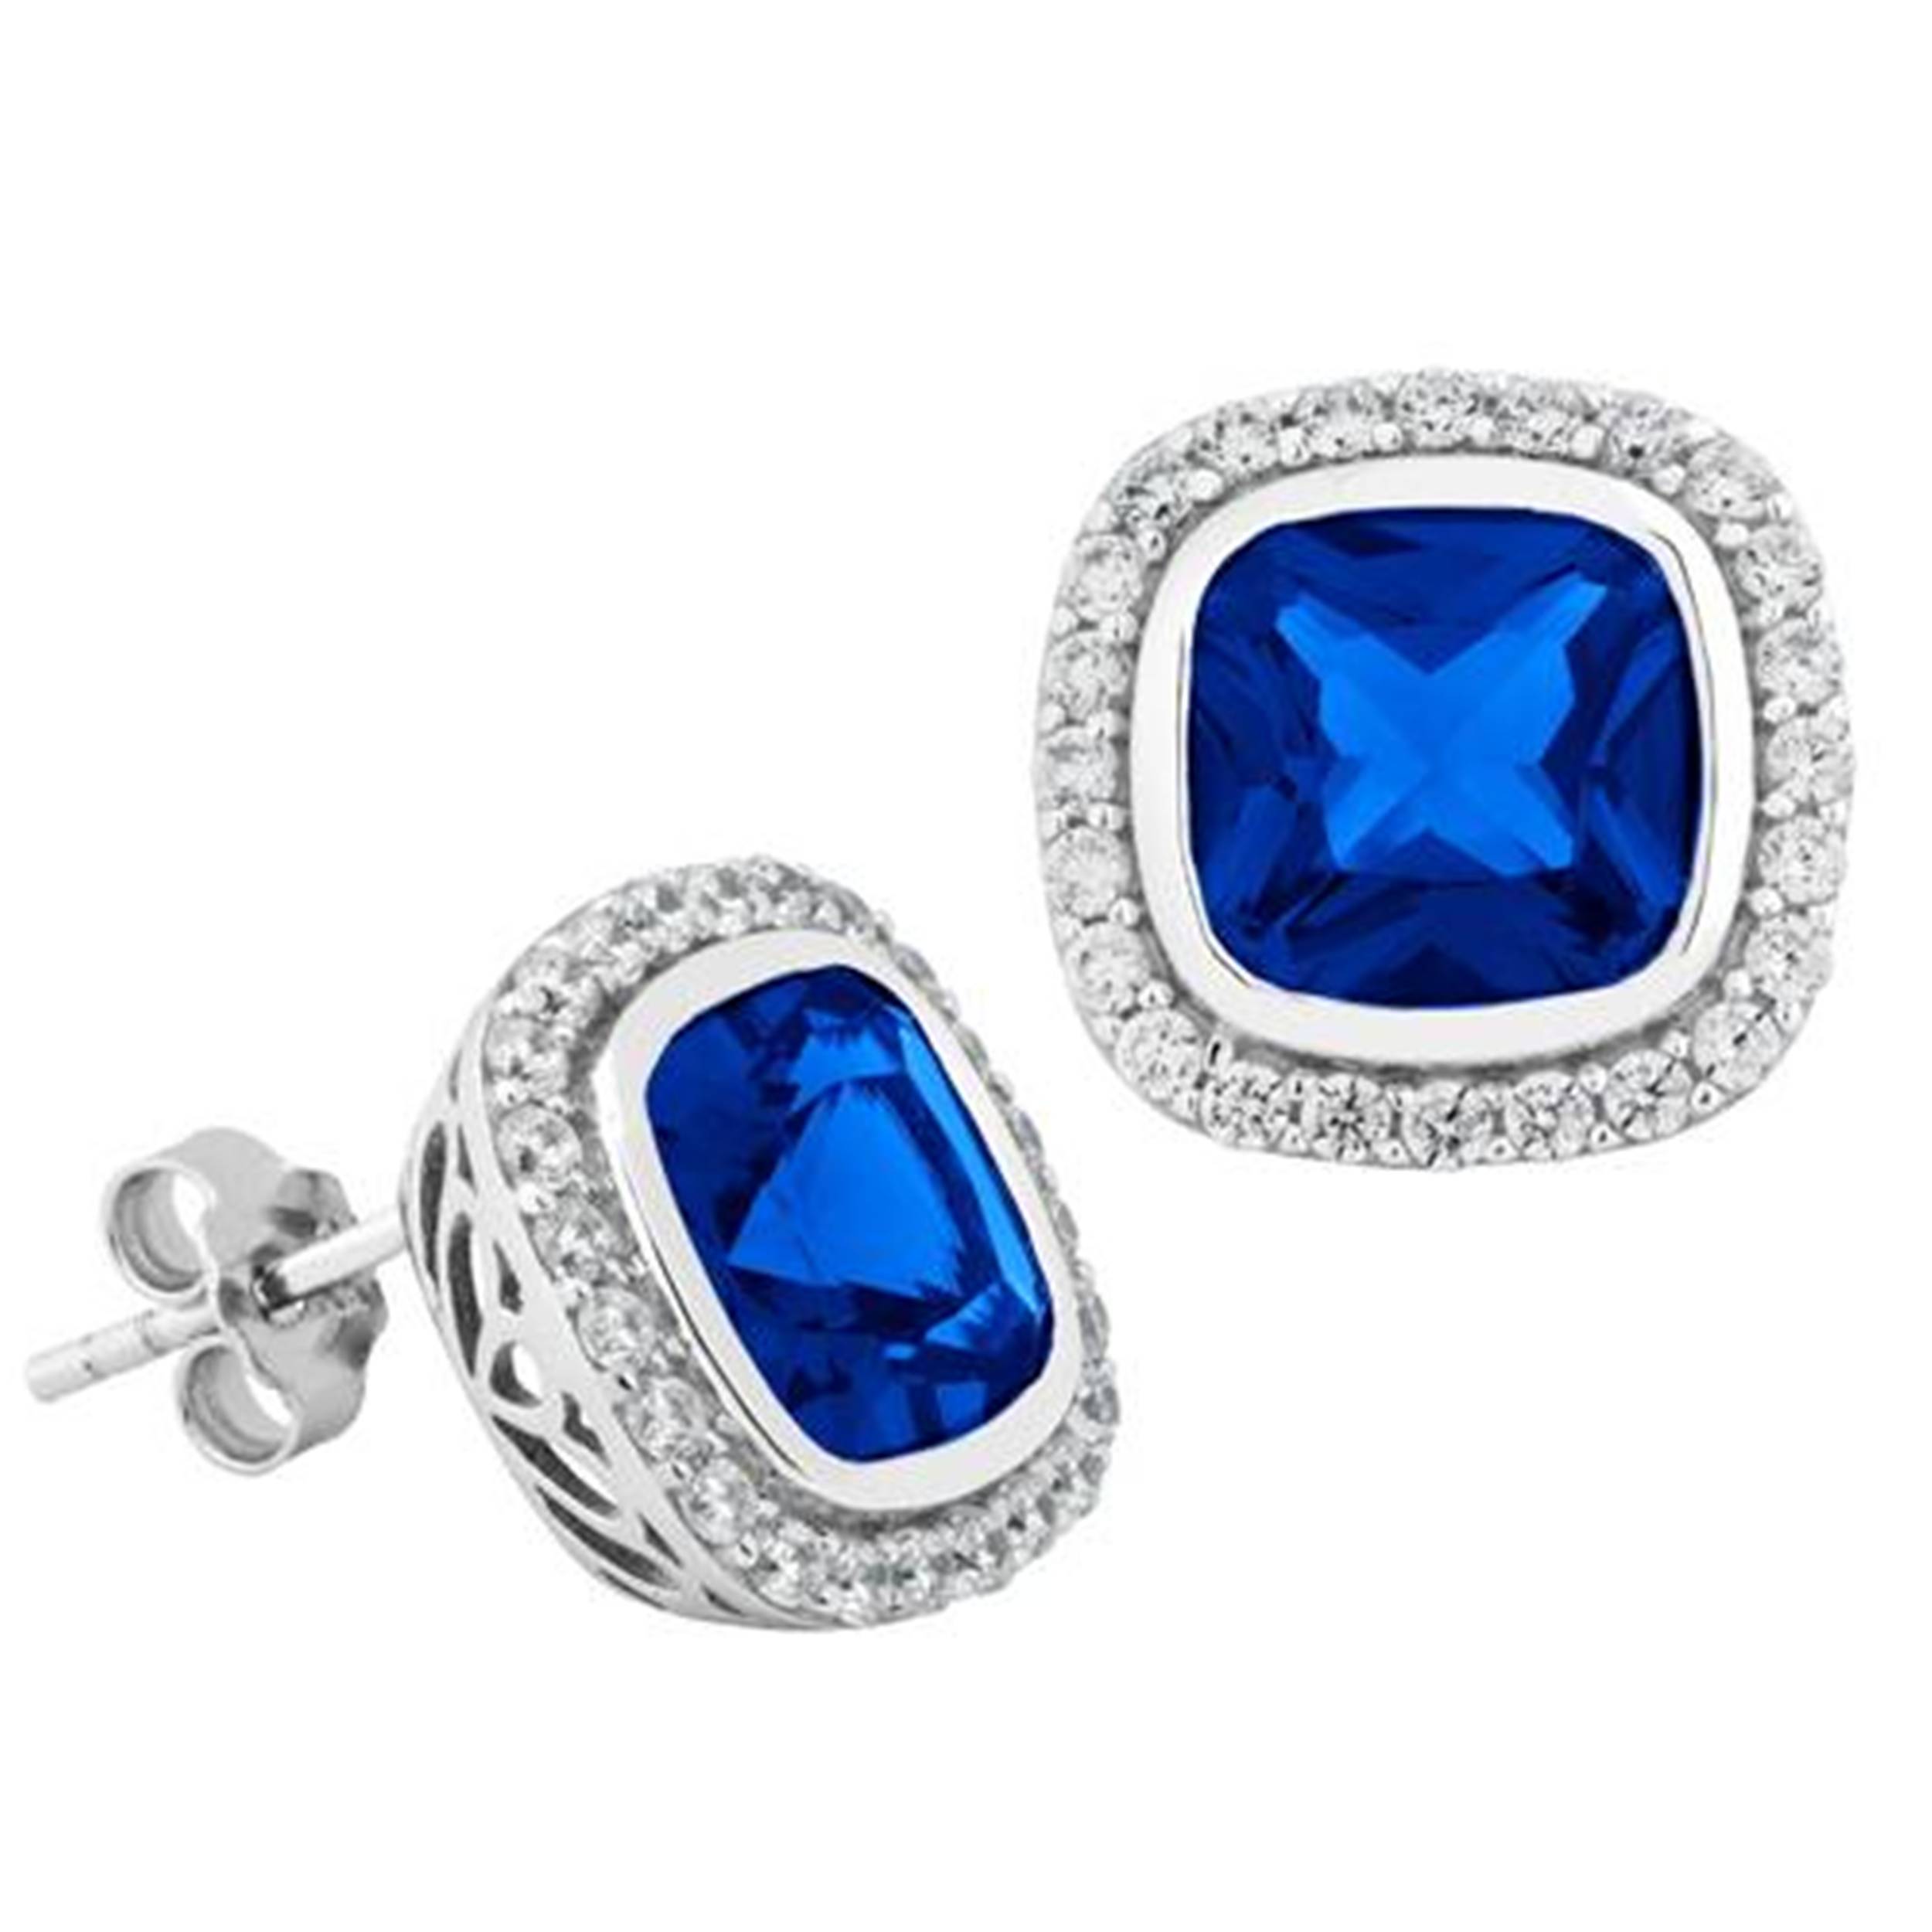 Inlaid Cushion-Cut Created Blue Sapphire and White Topaz Stud Earrings, Rhodium Plated Sterling Silver